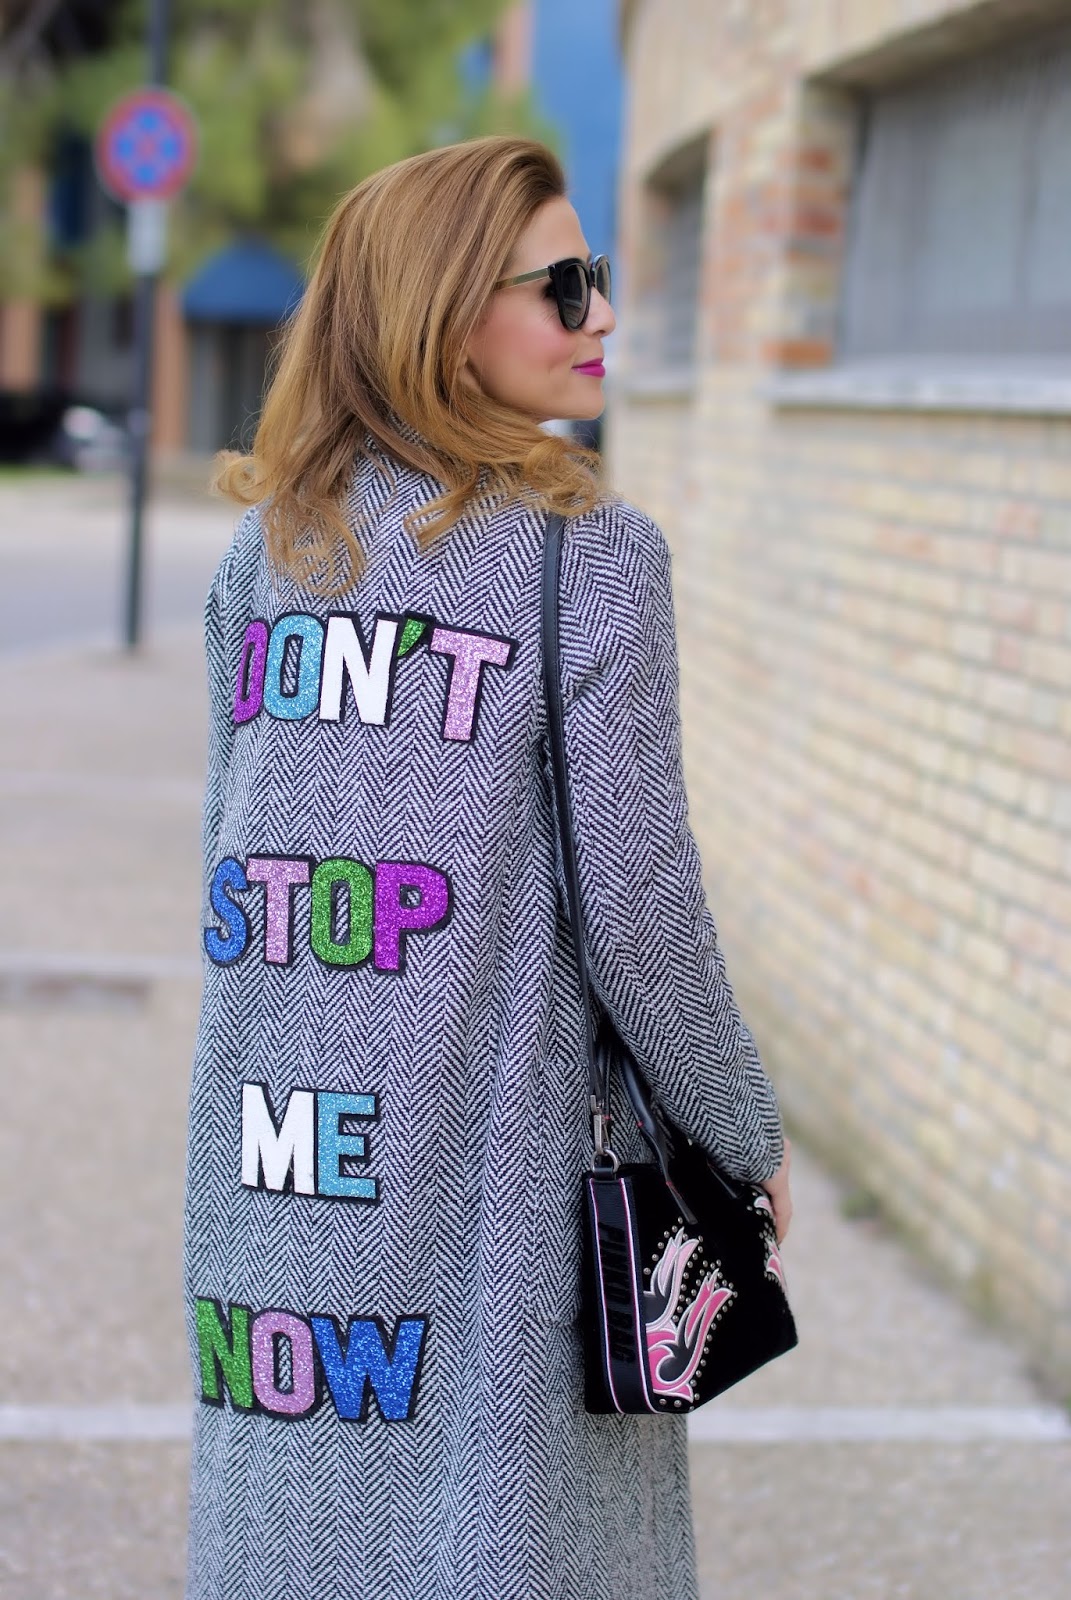 Don't stop me now: last outfit of 2018 with Front Street coat on Fashion and Cookies fashion blog, fashion blogger style